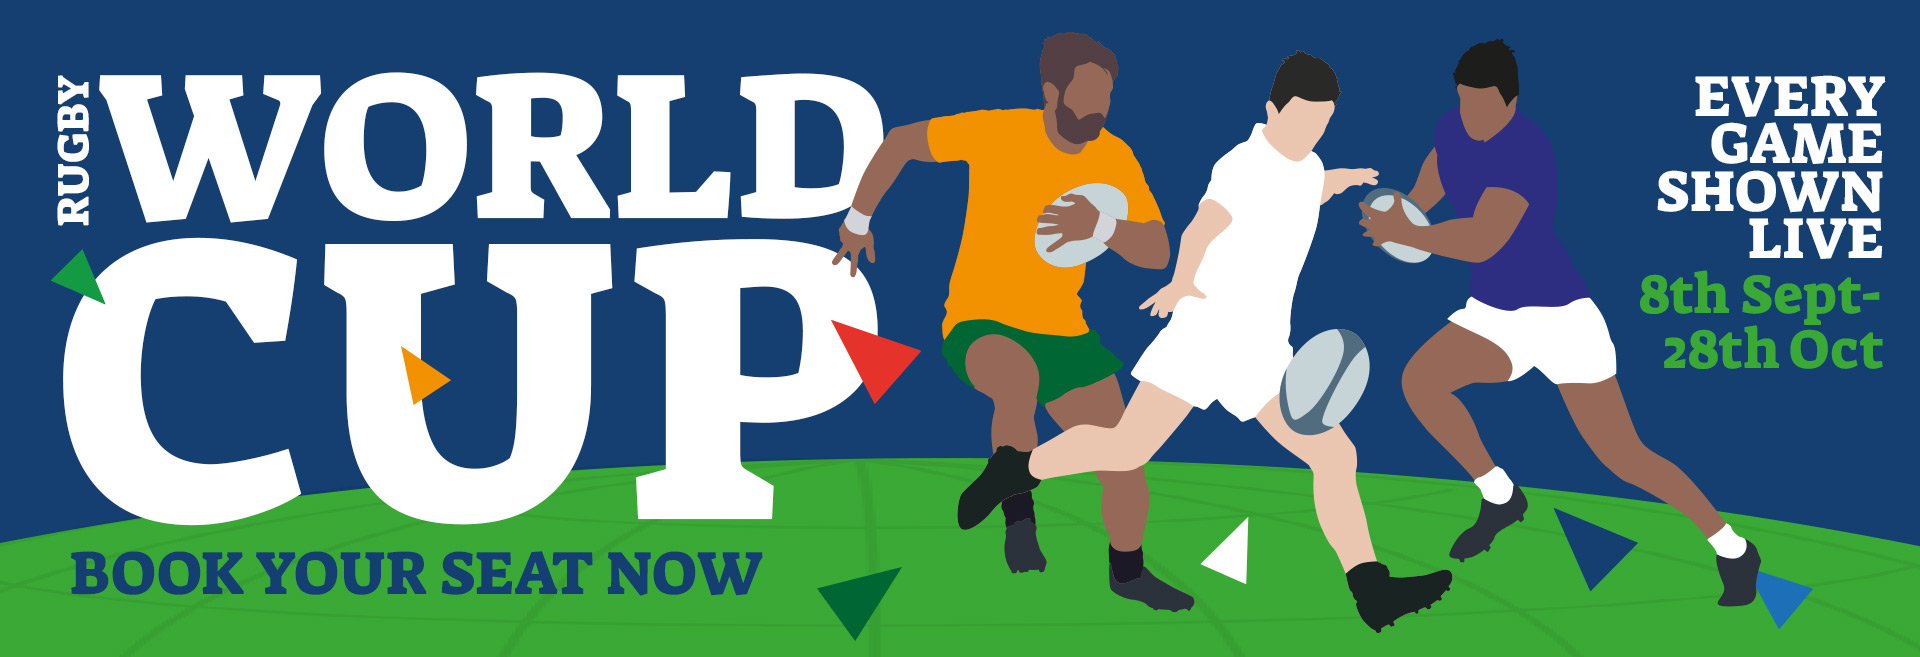 Watch the Rugby World Cup at The Royal Oak